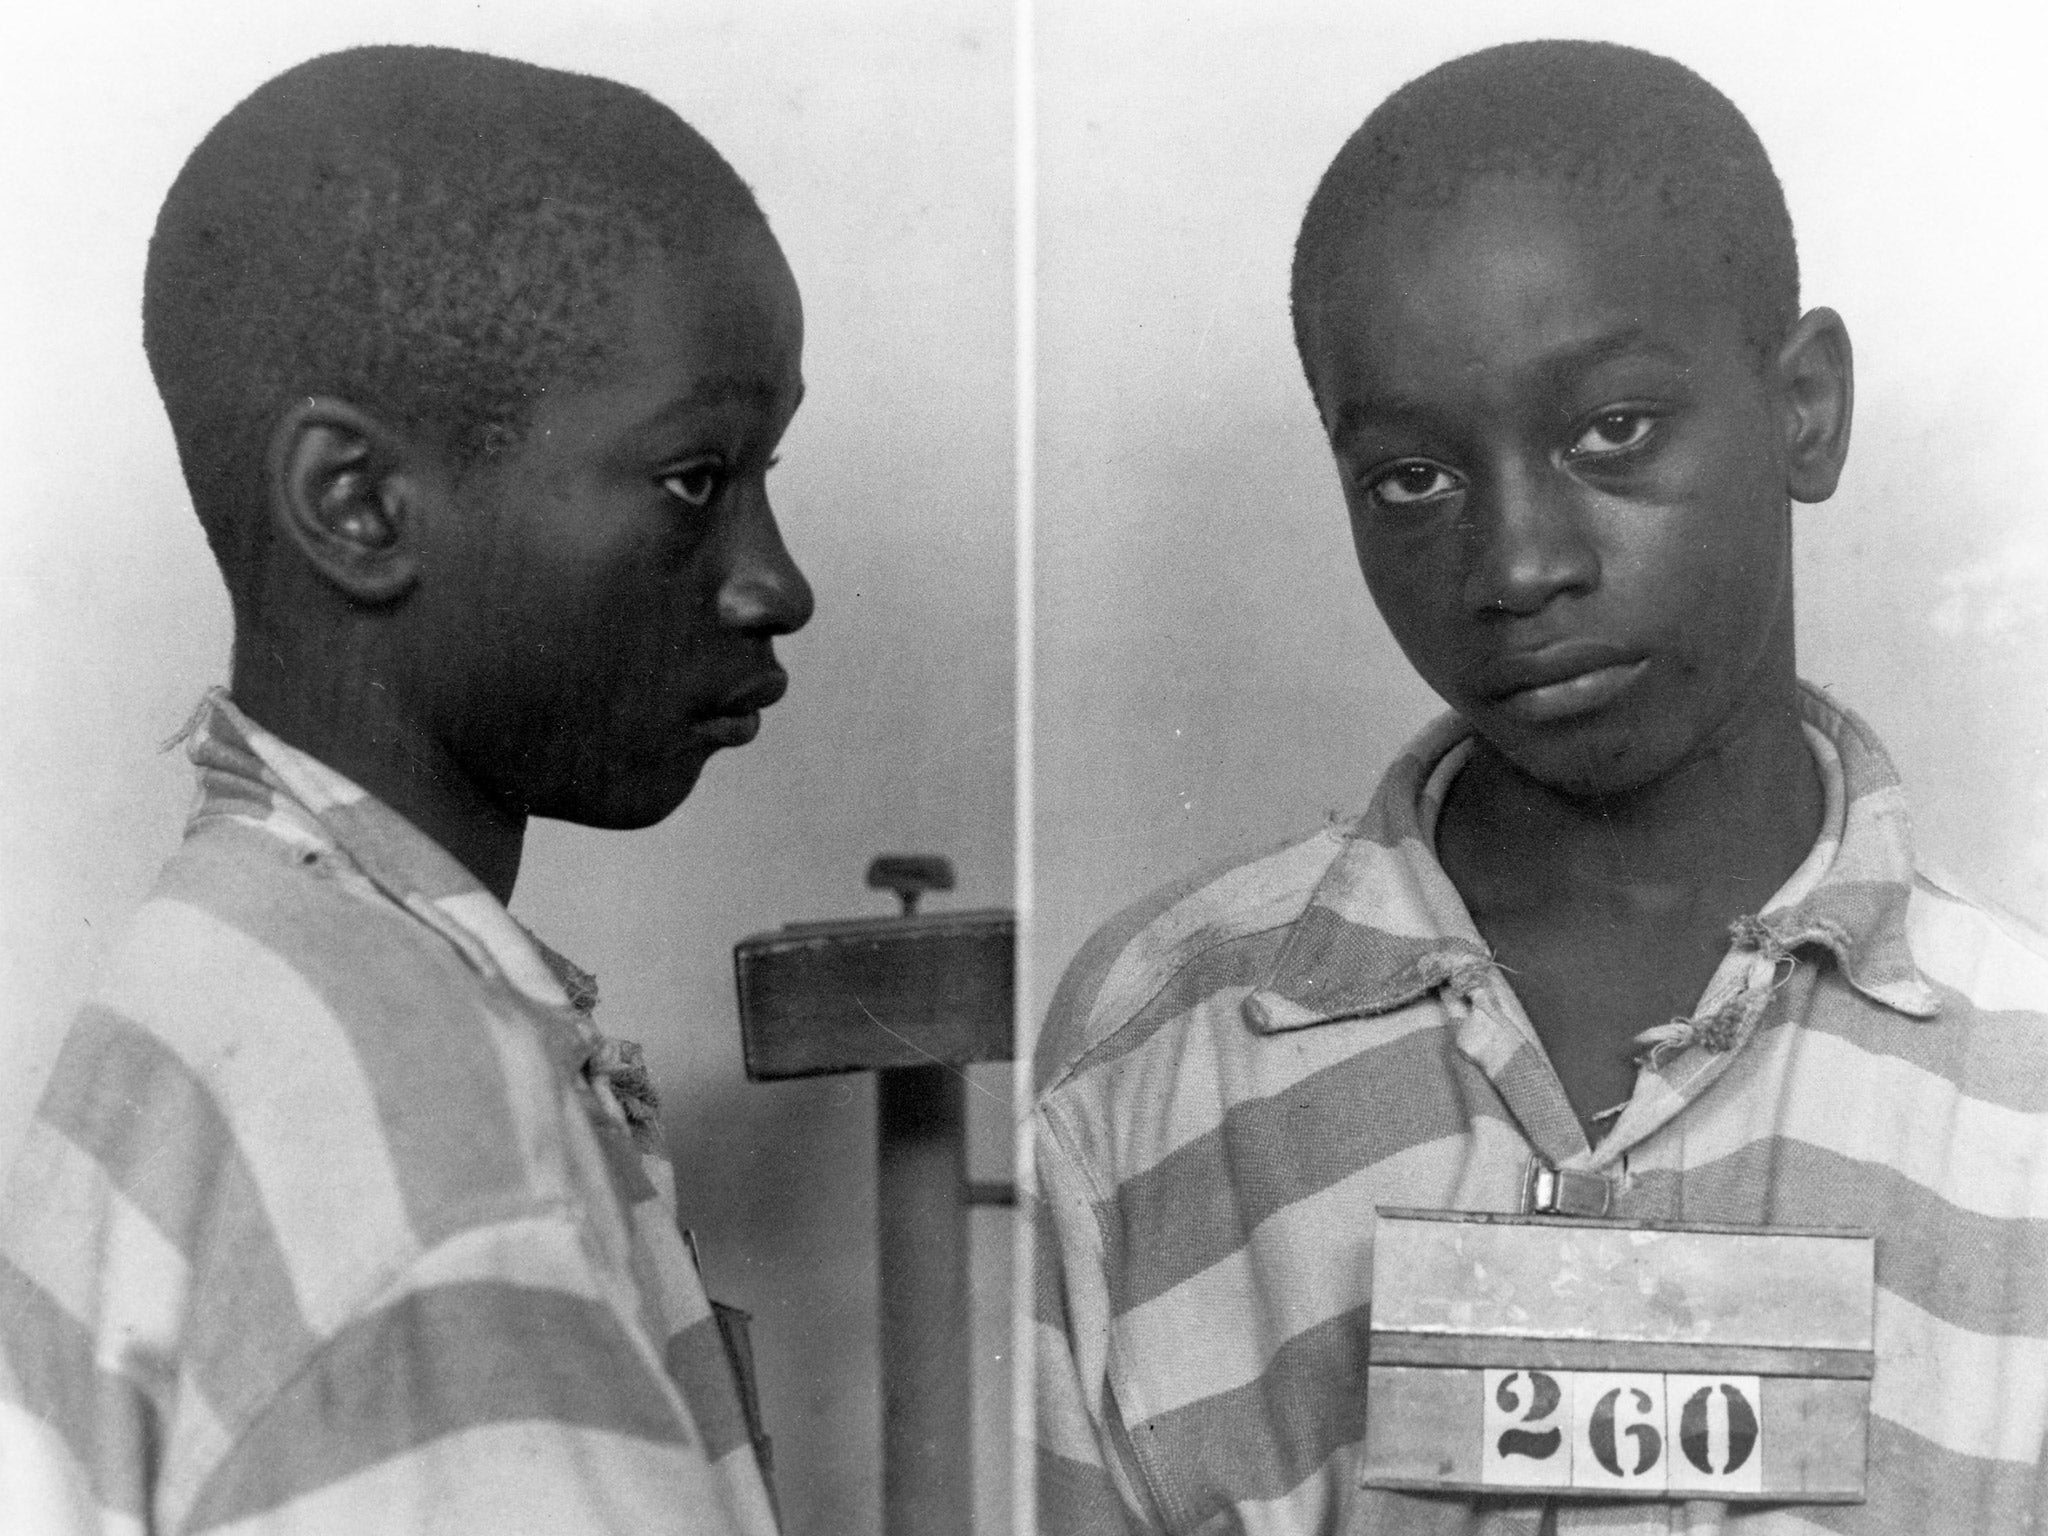 George Stinney, the youngest person ever executed in South Carolina, in 1944